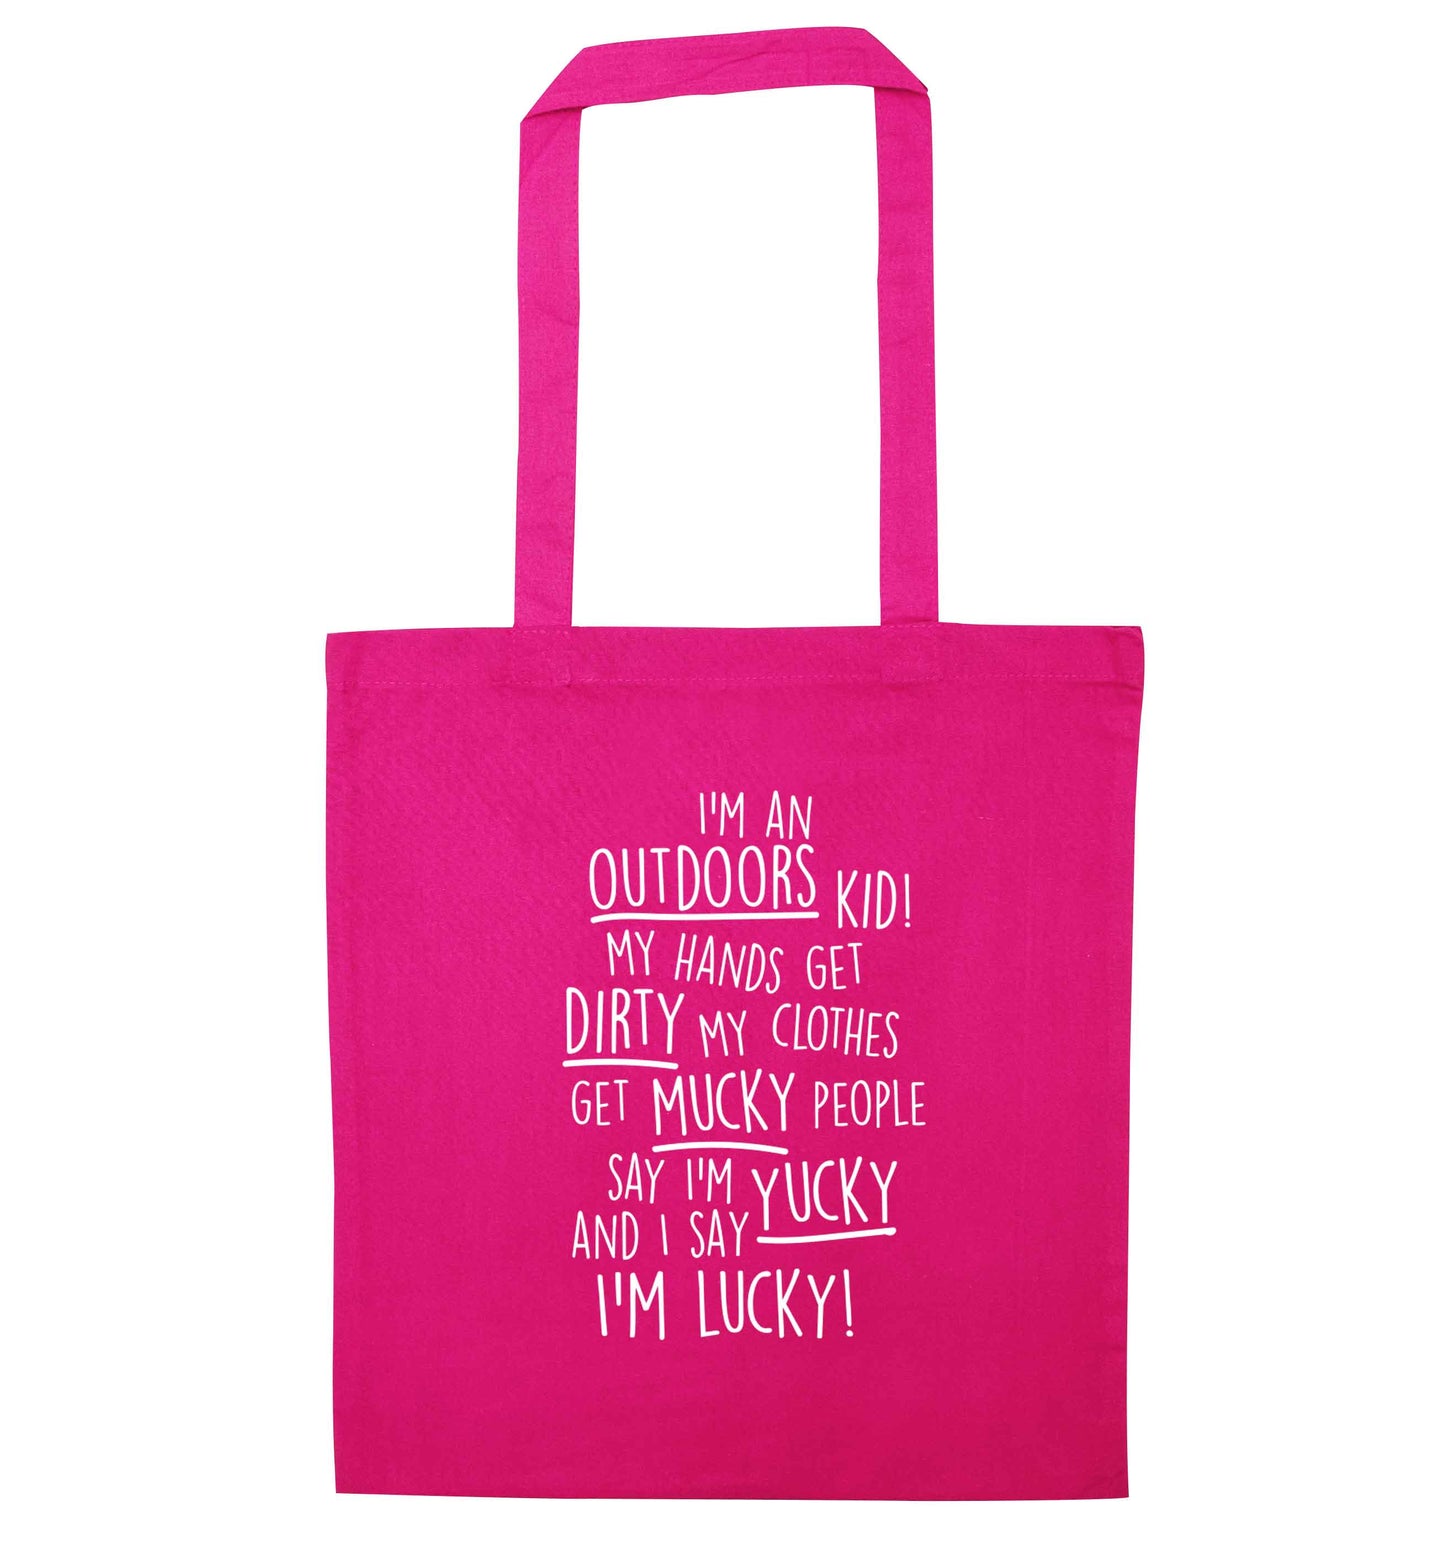 I'm an outdoors kid poem pink tote bag